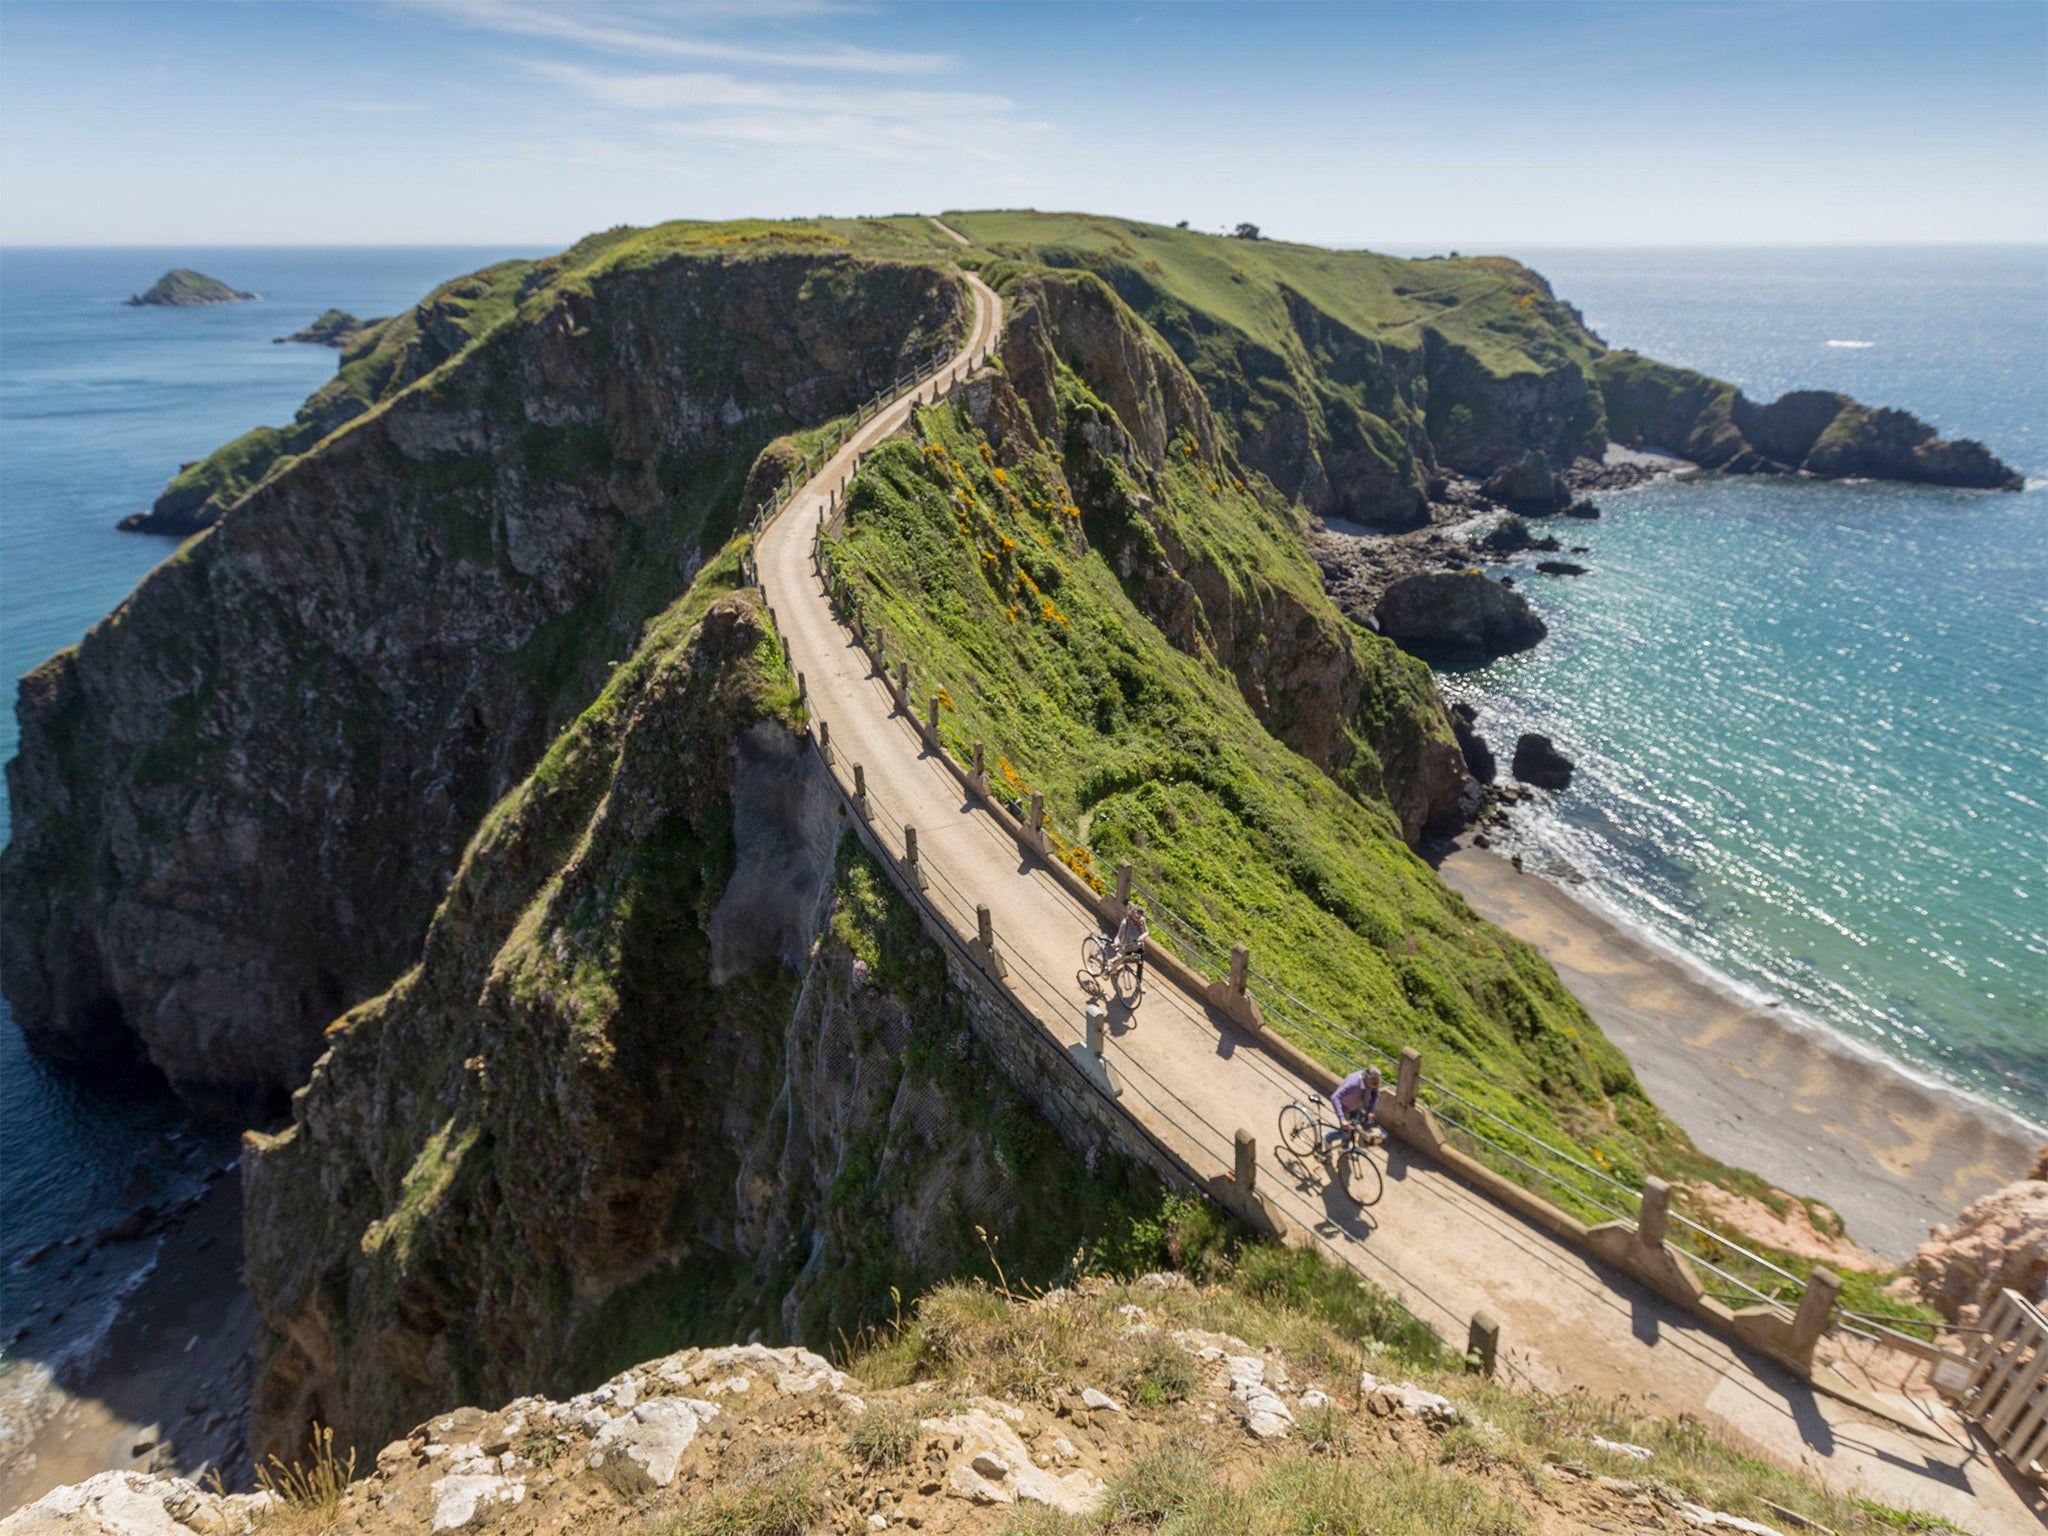 The tiny island of Sark held its first election in 2008 but the Barclays argued its system breached European laws